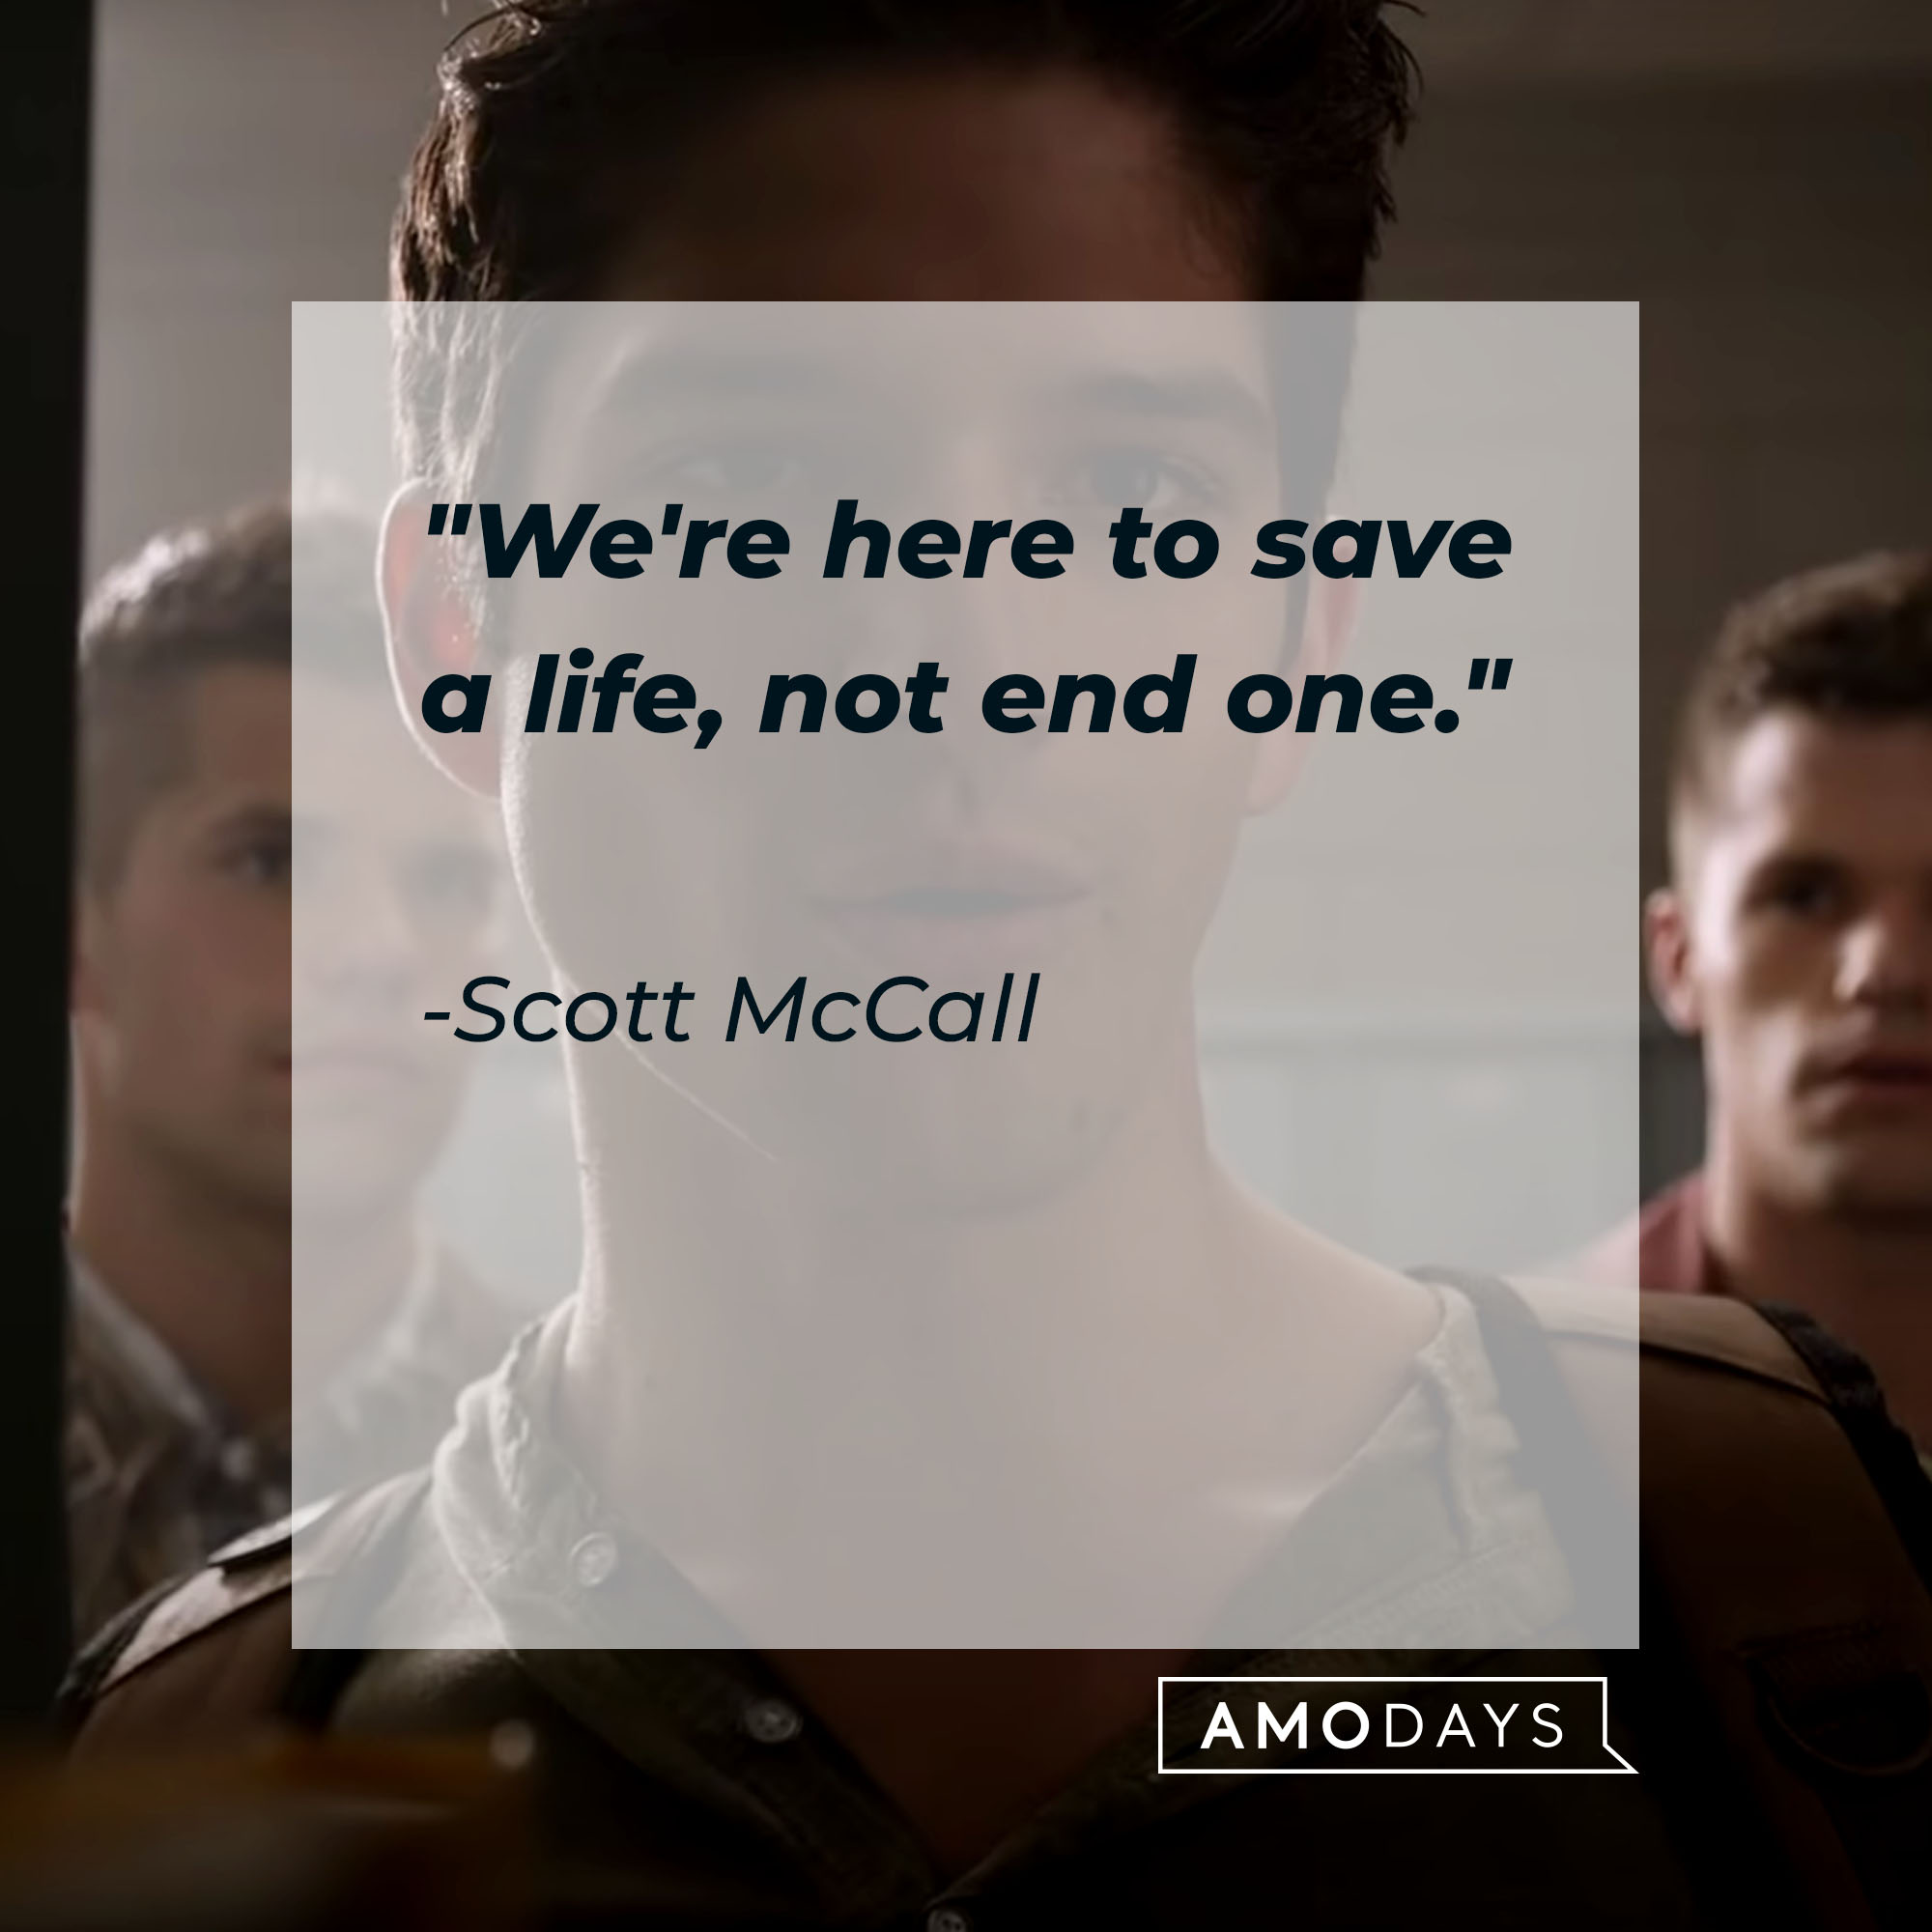 Scott McCall's quote: "We're here to save a life, not end one" | Source: Youtube.com/WolfWatch